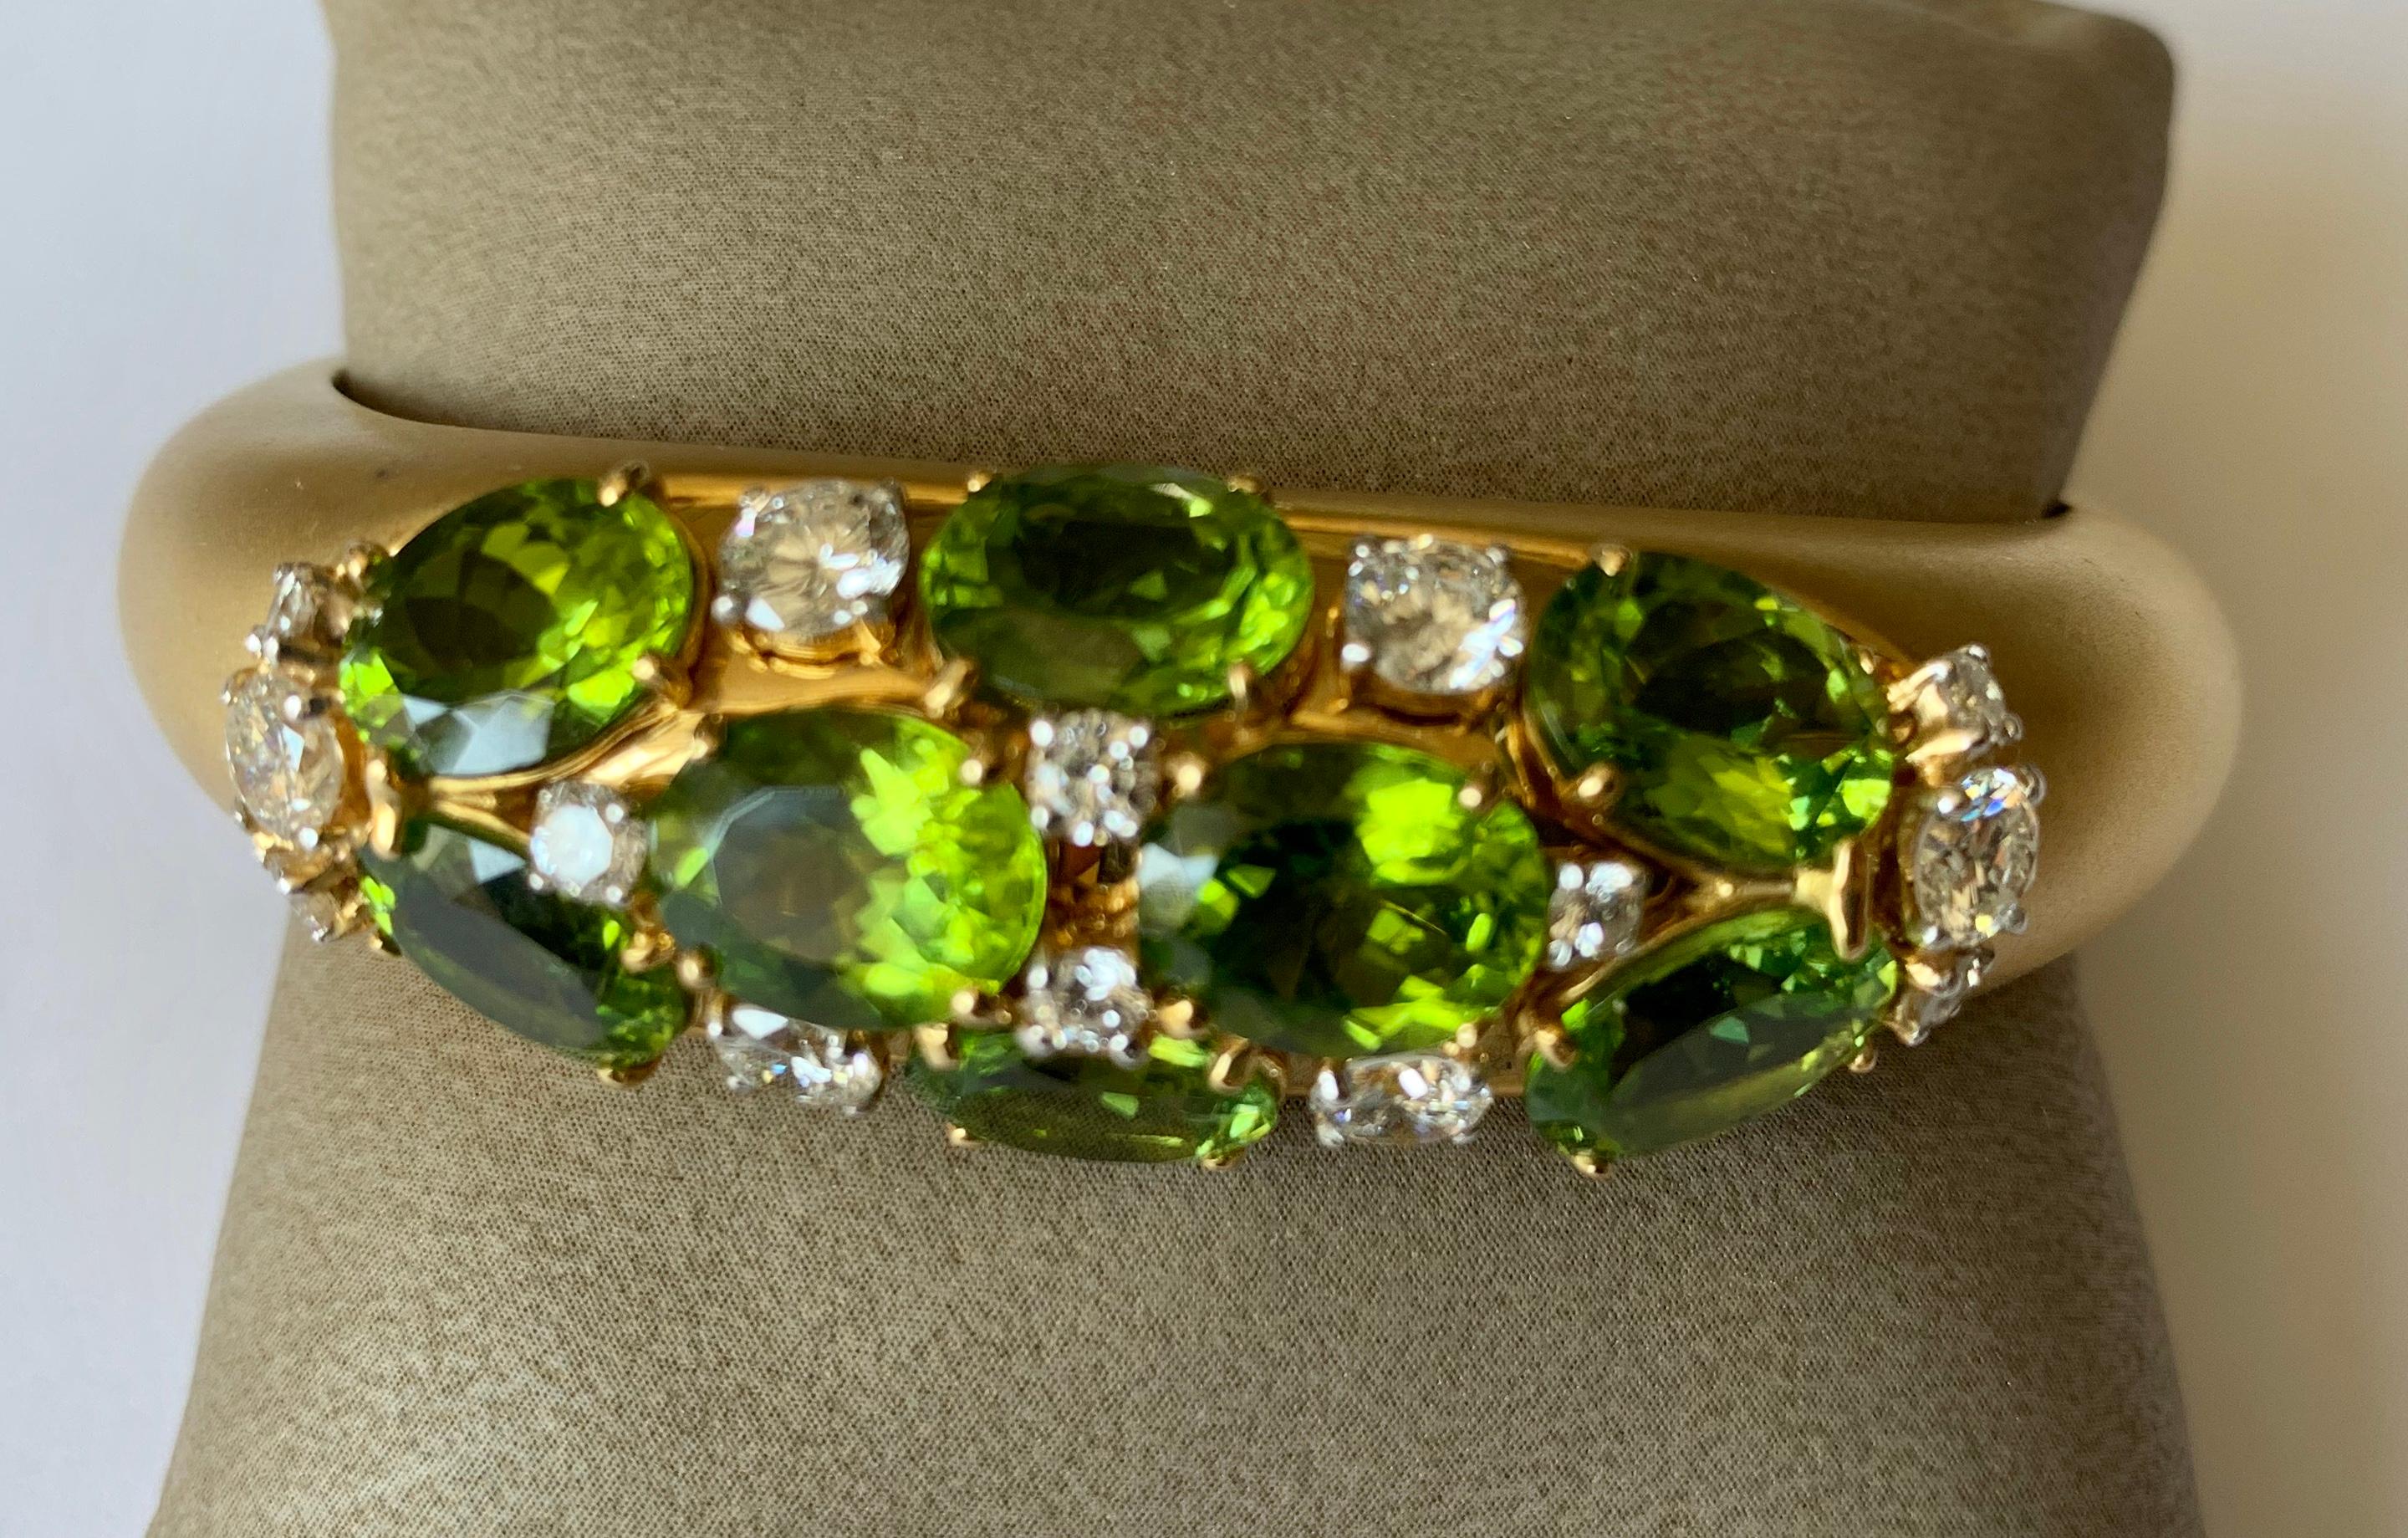 This tapered cuff bracelet fits snugly over the wrist. This beautiful brushed yellow gold bracelet is set with 8 faceted Peridots weighing 21.71 ct and 14 brilliant cut diamonds totaling 2.98 ct. Exquisite workmanship! 